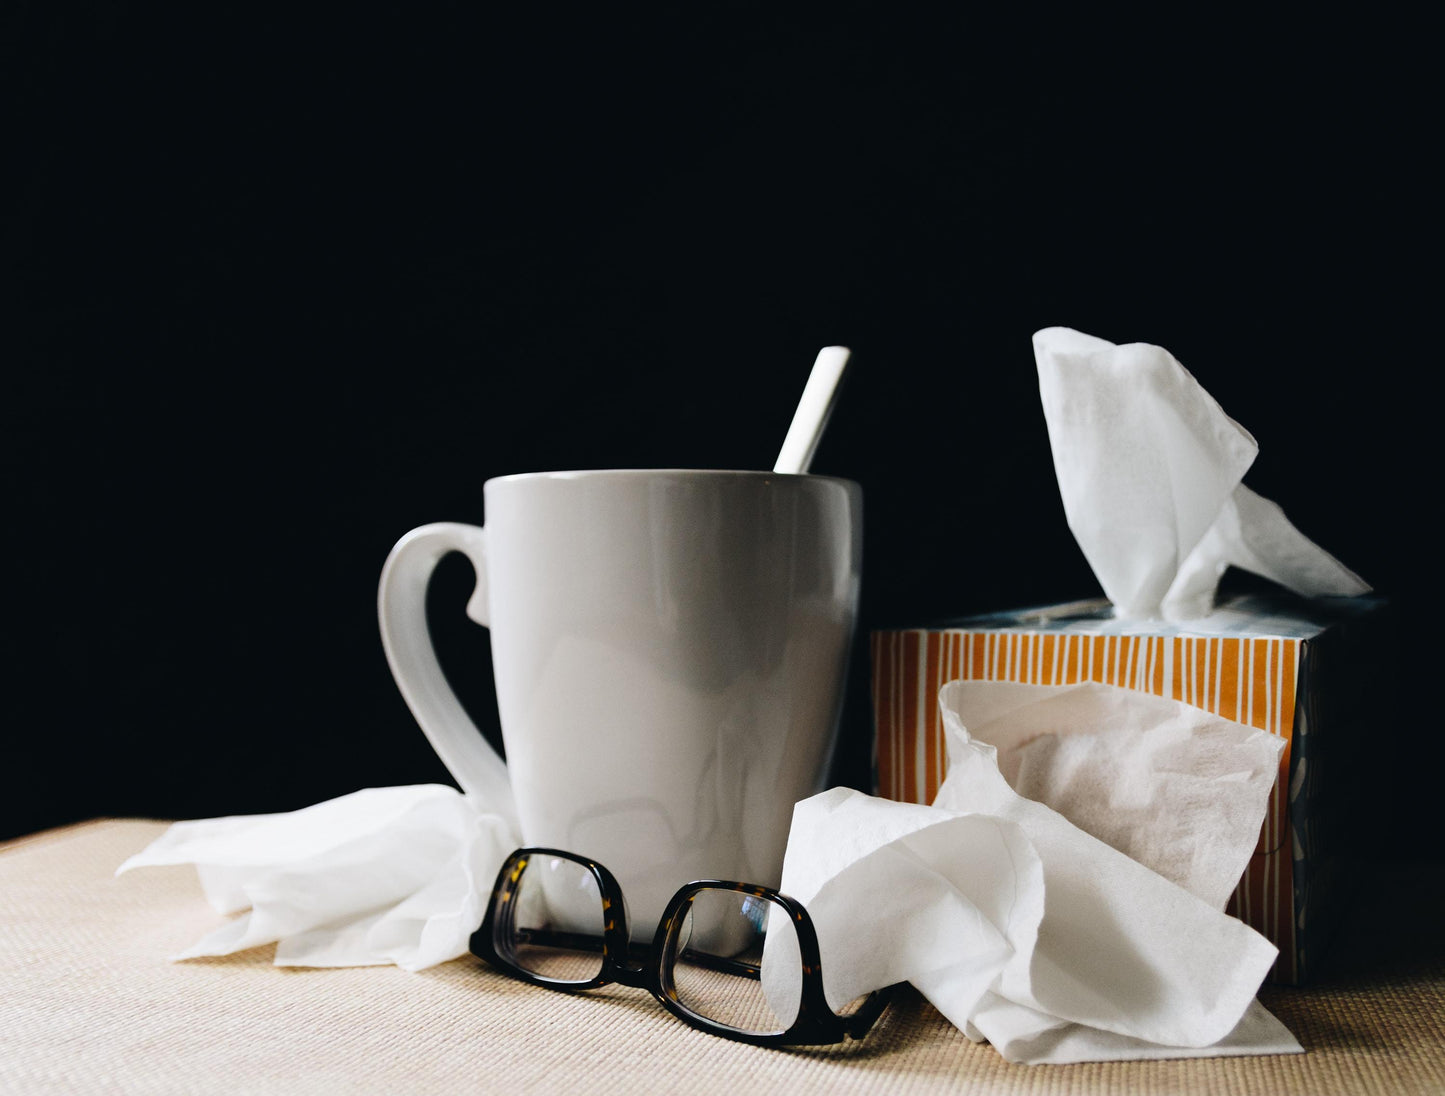 Five Natural Remedies for Colds and Flus